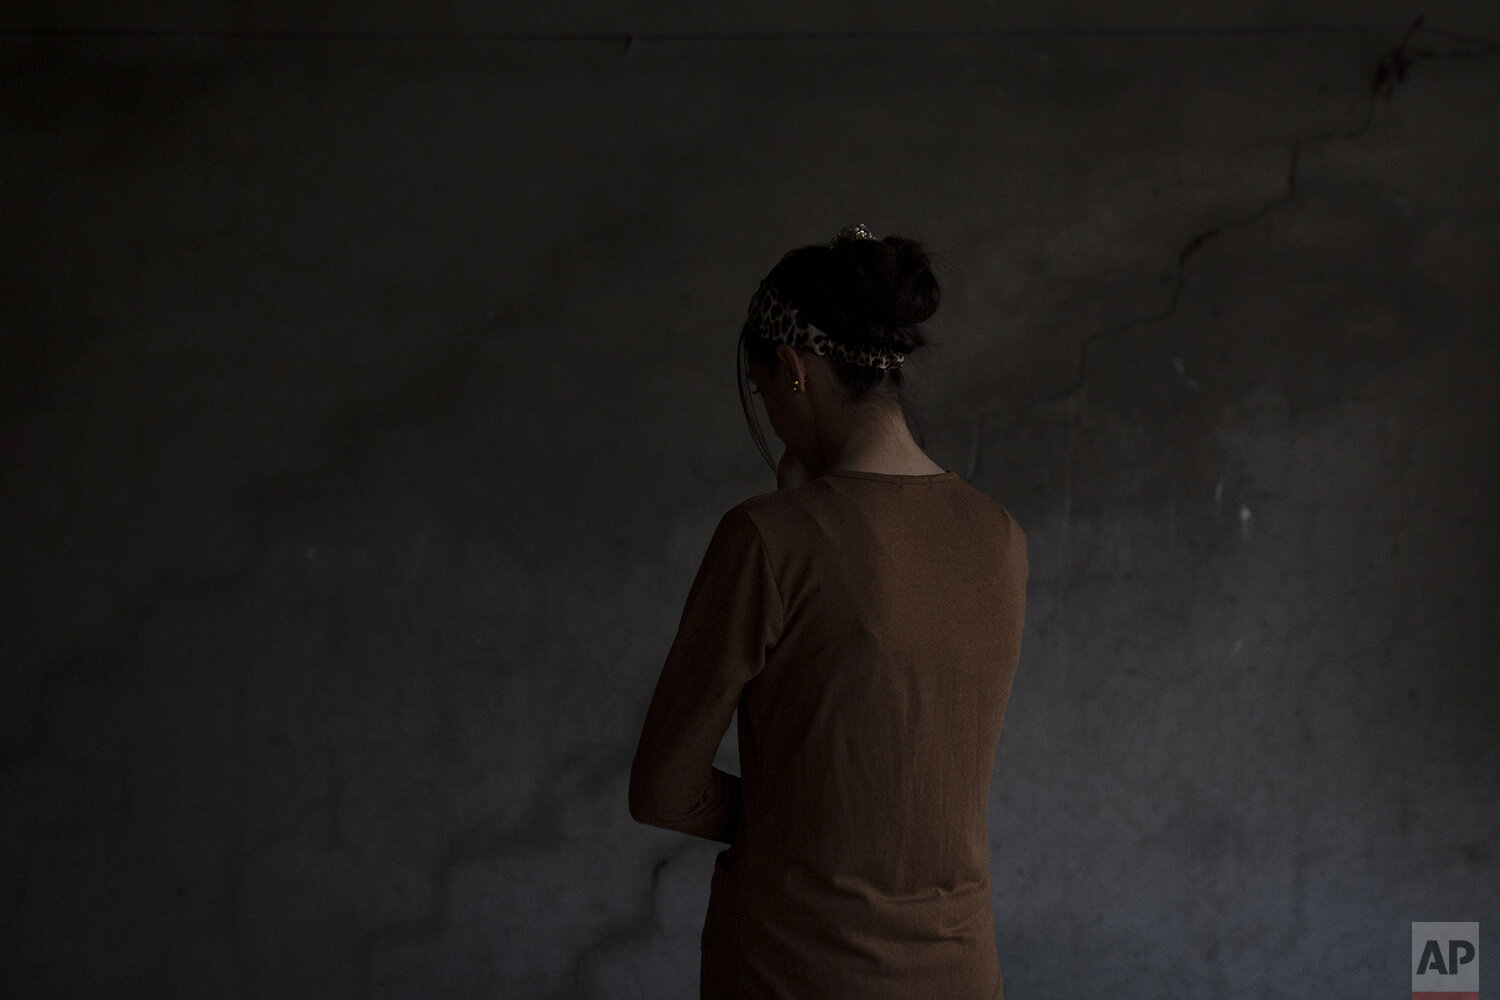  In this Nov. 15, 2019, photo, a Yazidi woman who endured five years of captivity by Islamic State militants poses for a portrait in her home in northern Iraq. “They beat me and sold me and did everything to me,” she says. Raped by nearly a dozen own